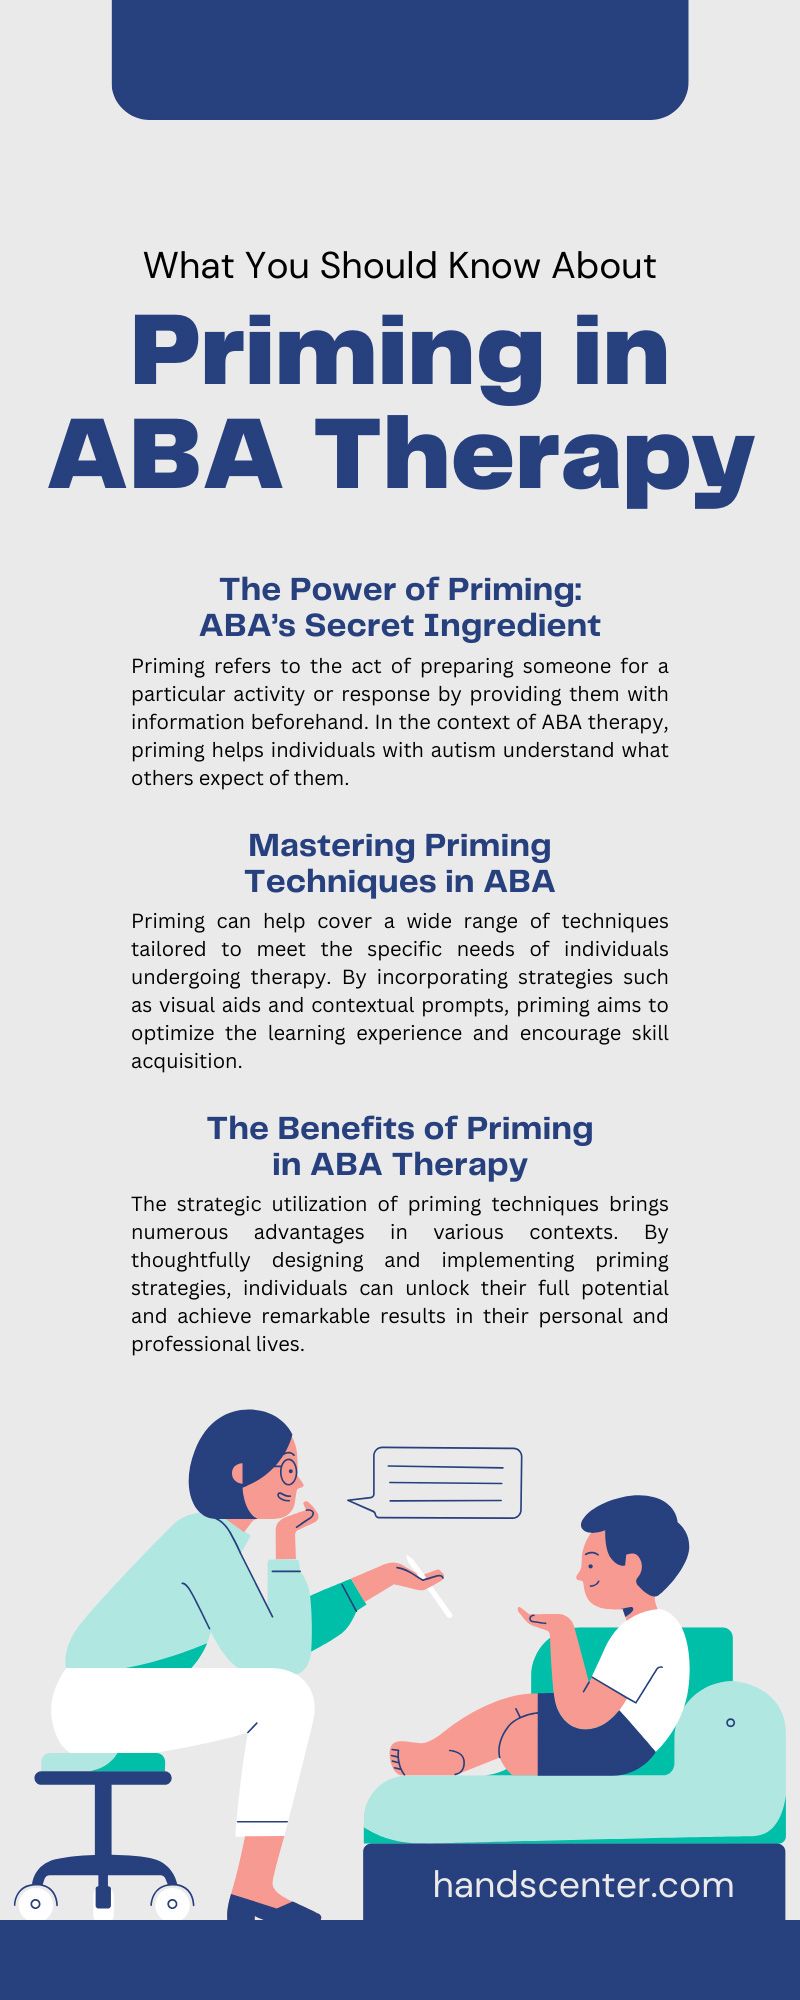 What You Should Know About Priming in ABA Therapy